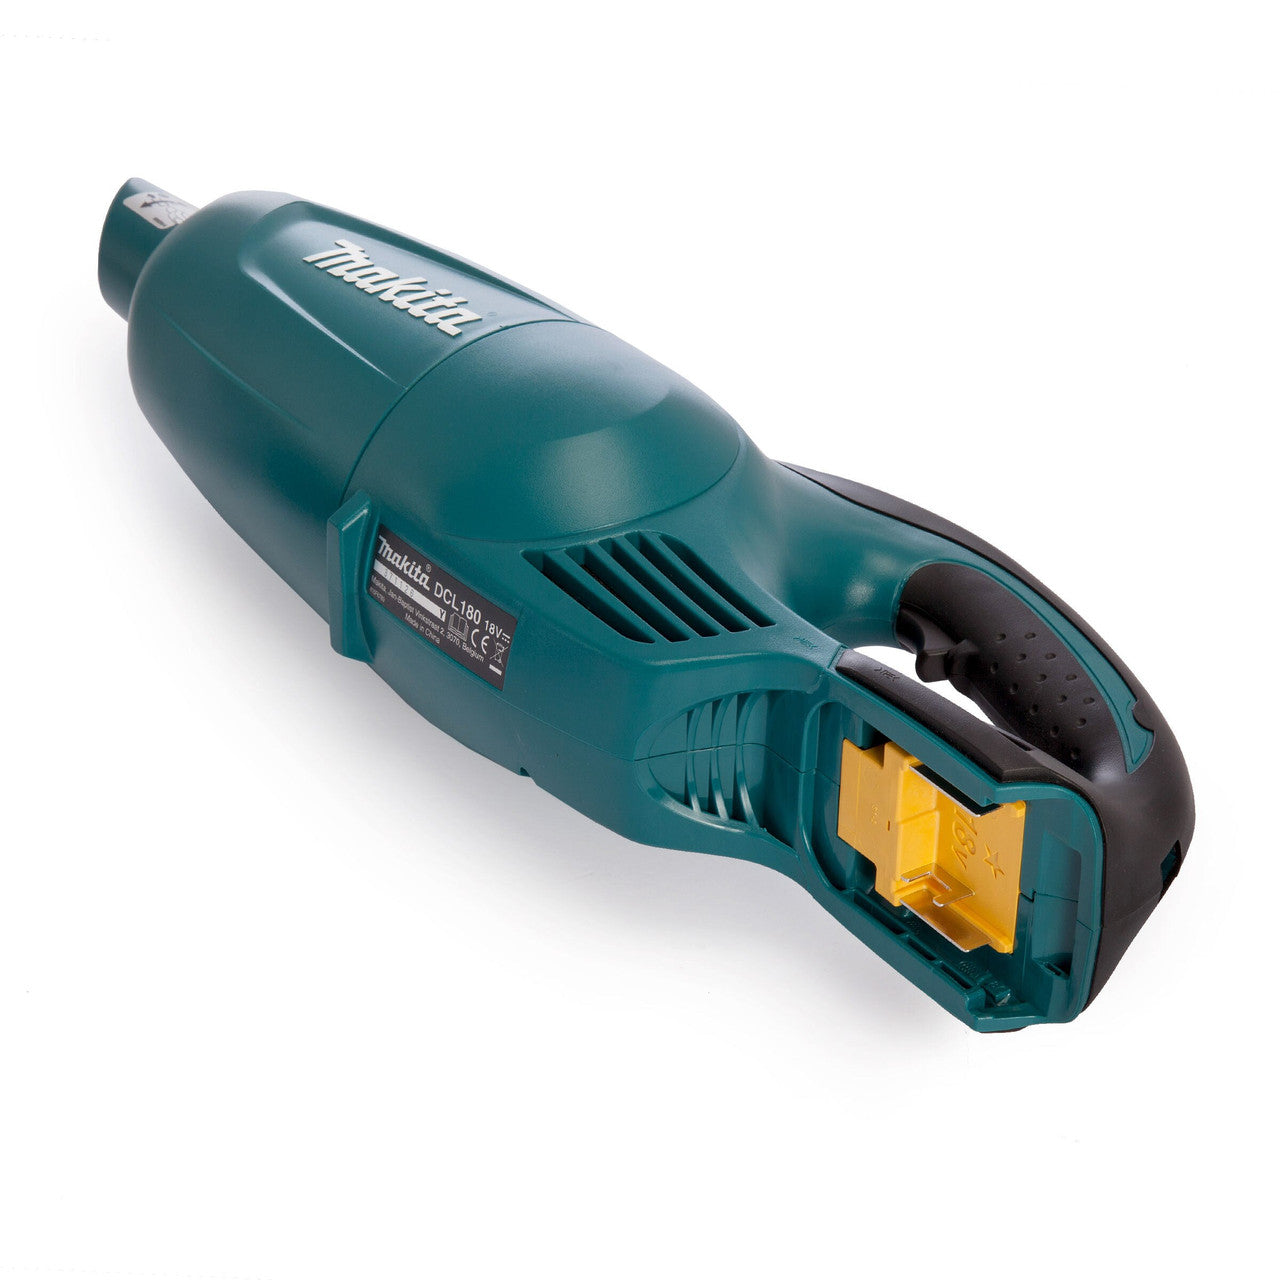 Makita DCL180Z 18V Cordless Vacuum Cleaner (Body Only)